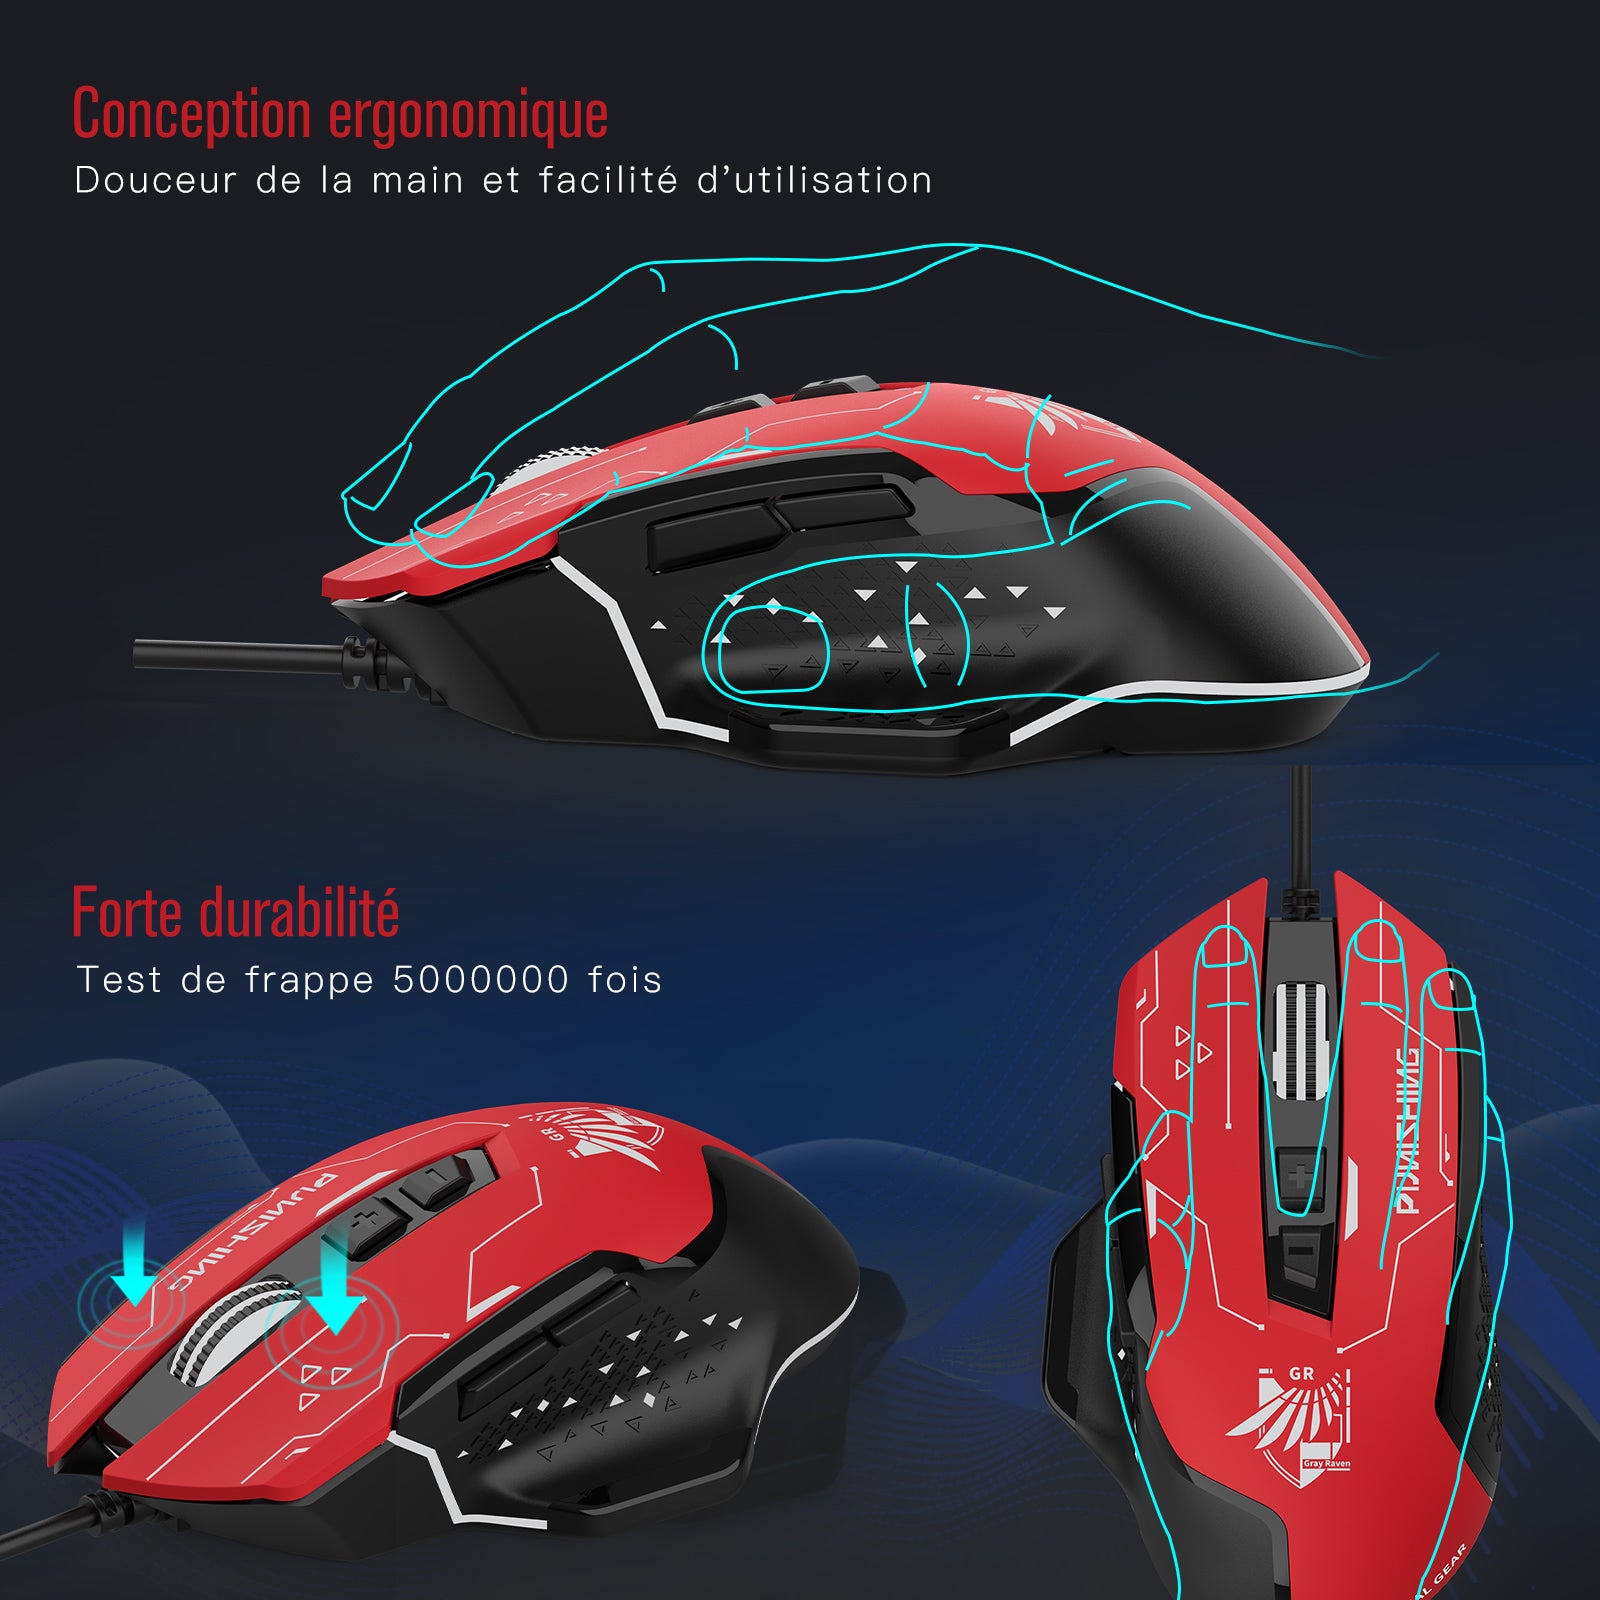 GTPLAYER X PUNISHING: GRAY RAVEN SERIE MOUSE DA GIOCO SPECIALE